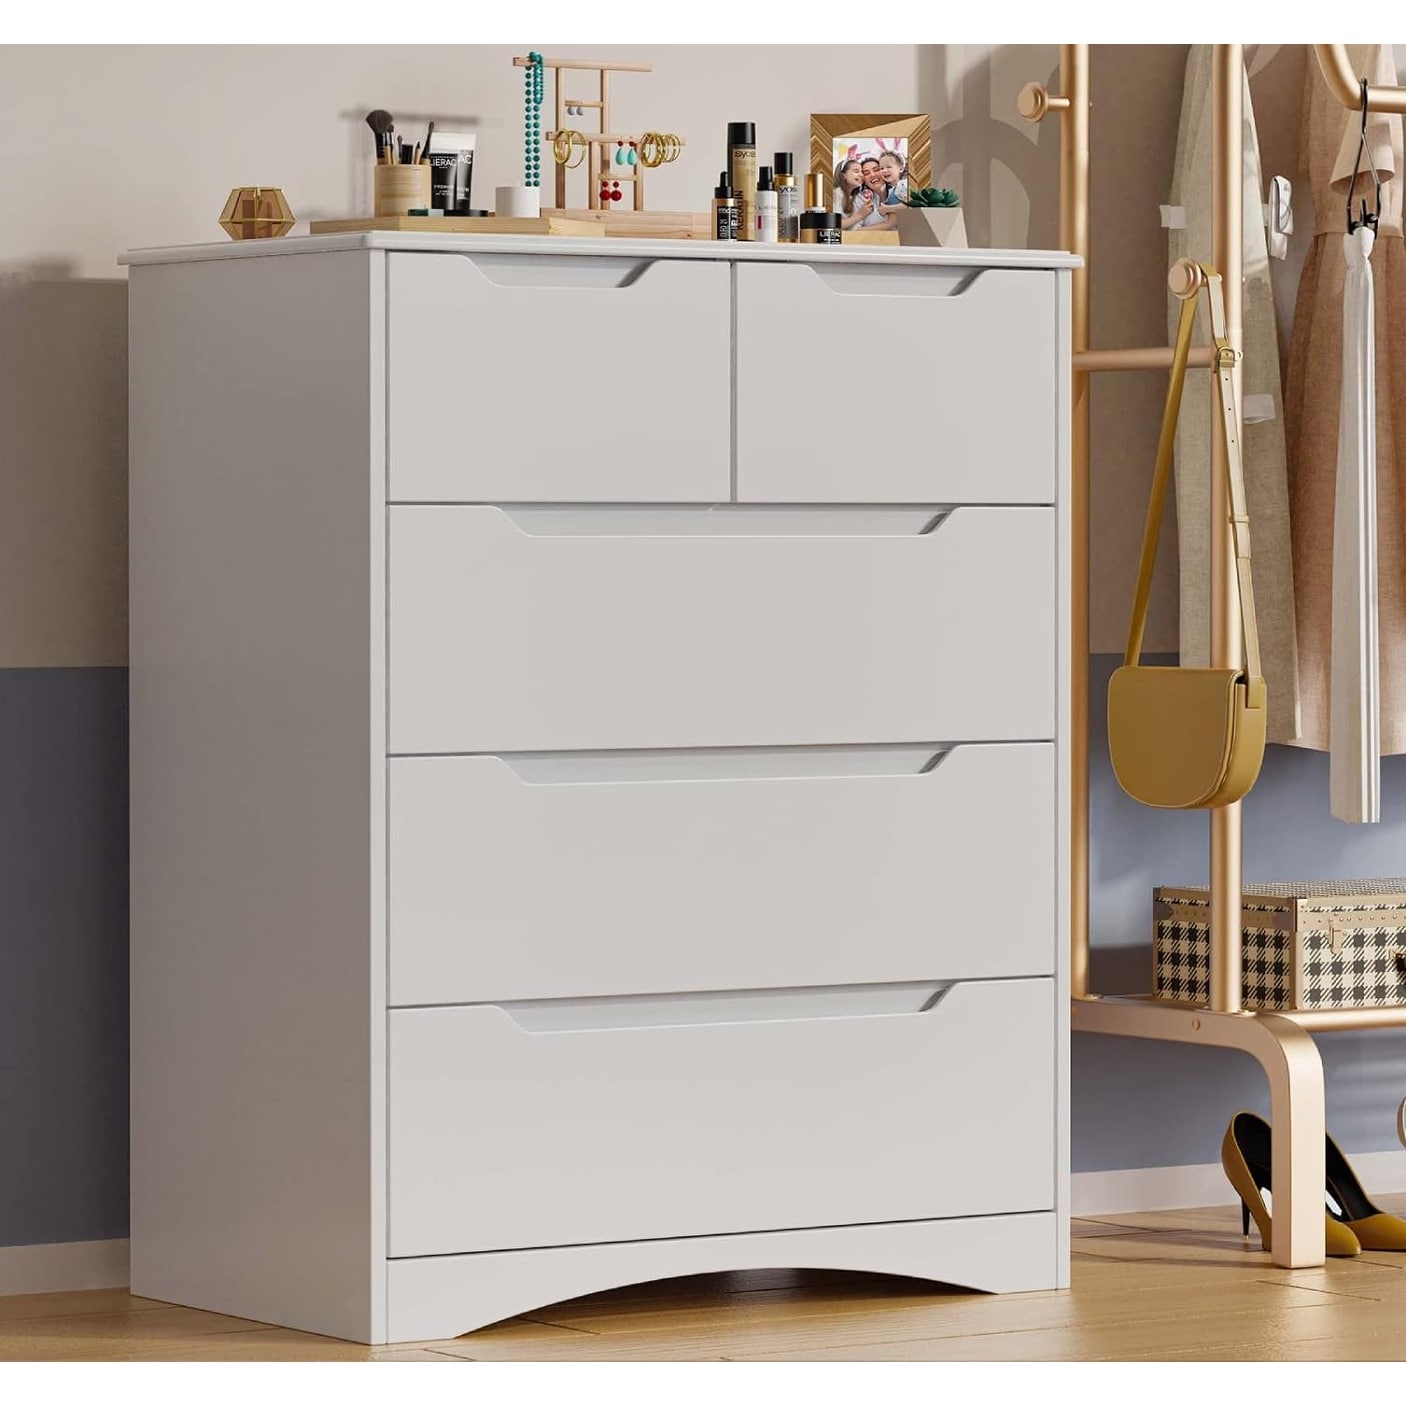 https://ak1.ostkcdn.com/images/products/is/images/direct/b1bafea0a4b8bfdc9ad2e45932f0351997182105/Gizoon-5-Drawers-Chest-White-Wood-Drawer-Dresser-for-Bedroom.jpg